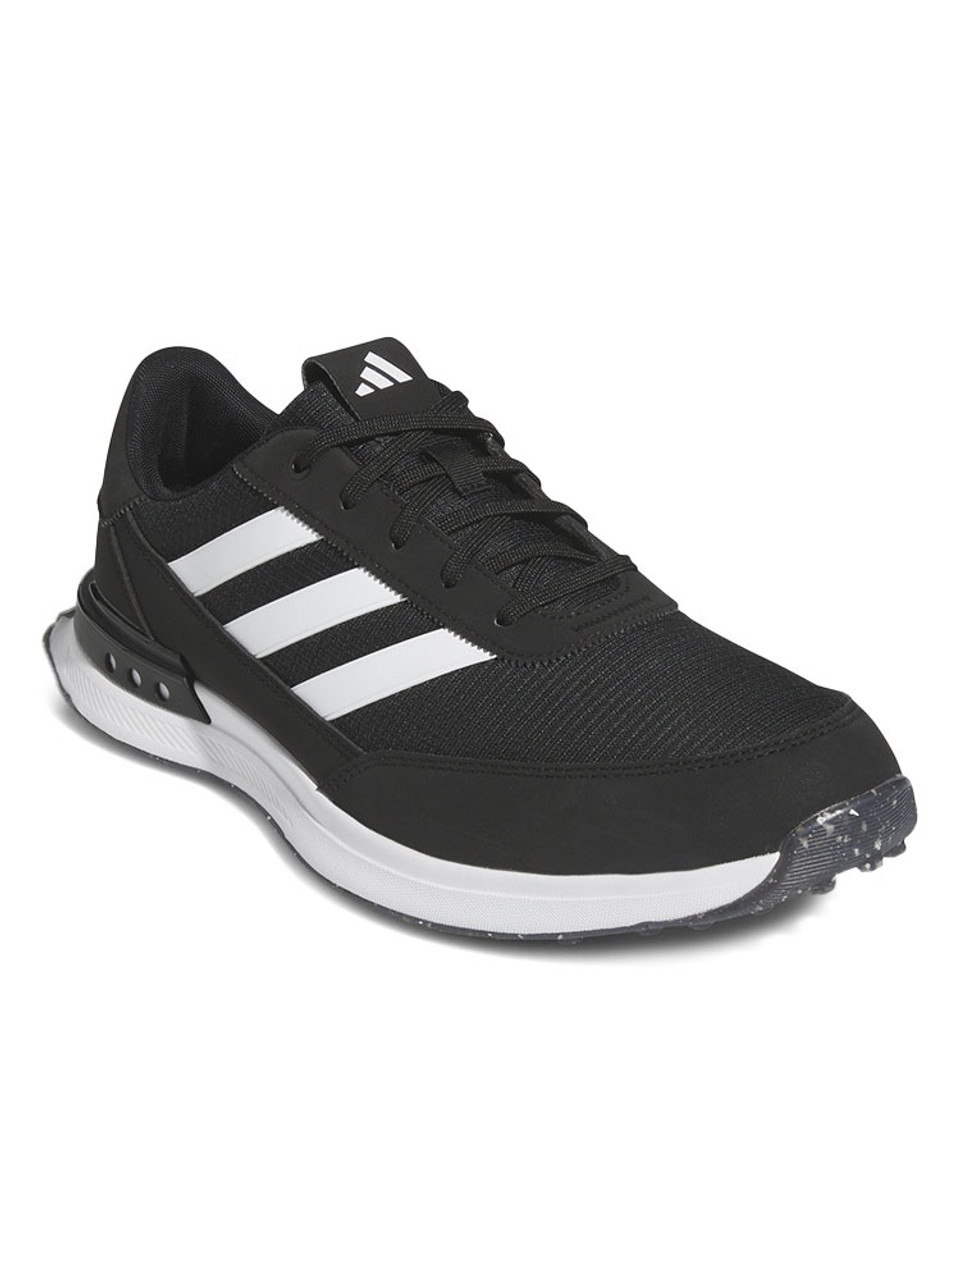 adidas S2G Spikeless 24 Golf Shoes (Wide Fit) - Core Black/Ftwr White ...